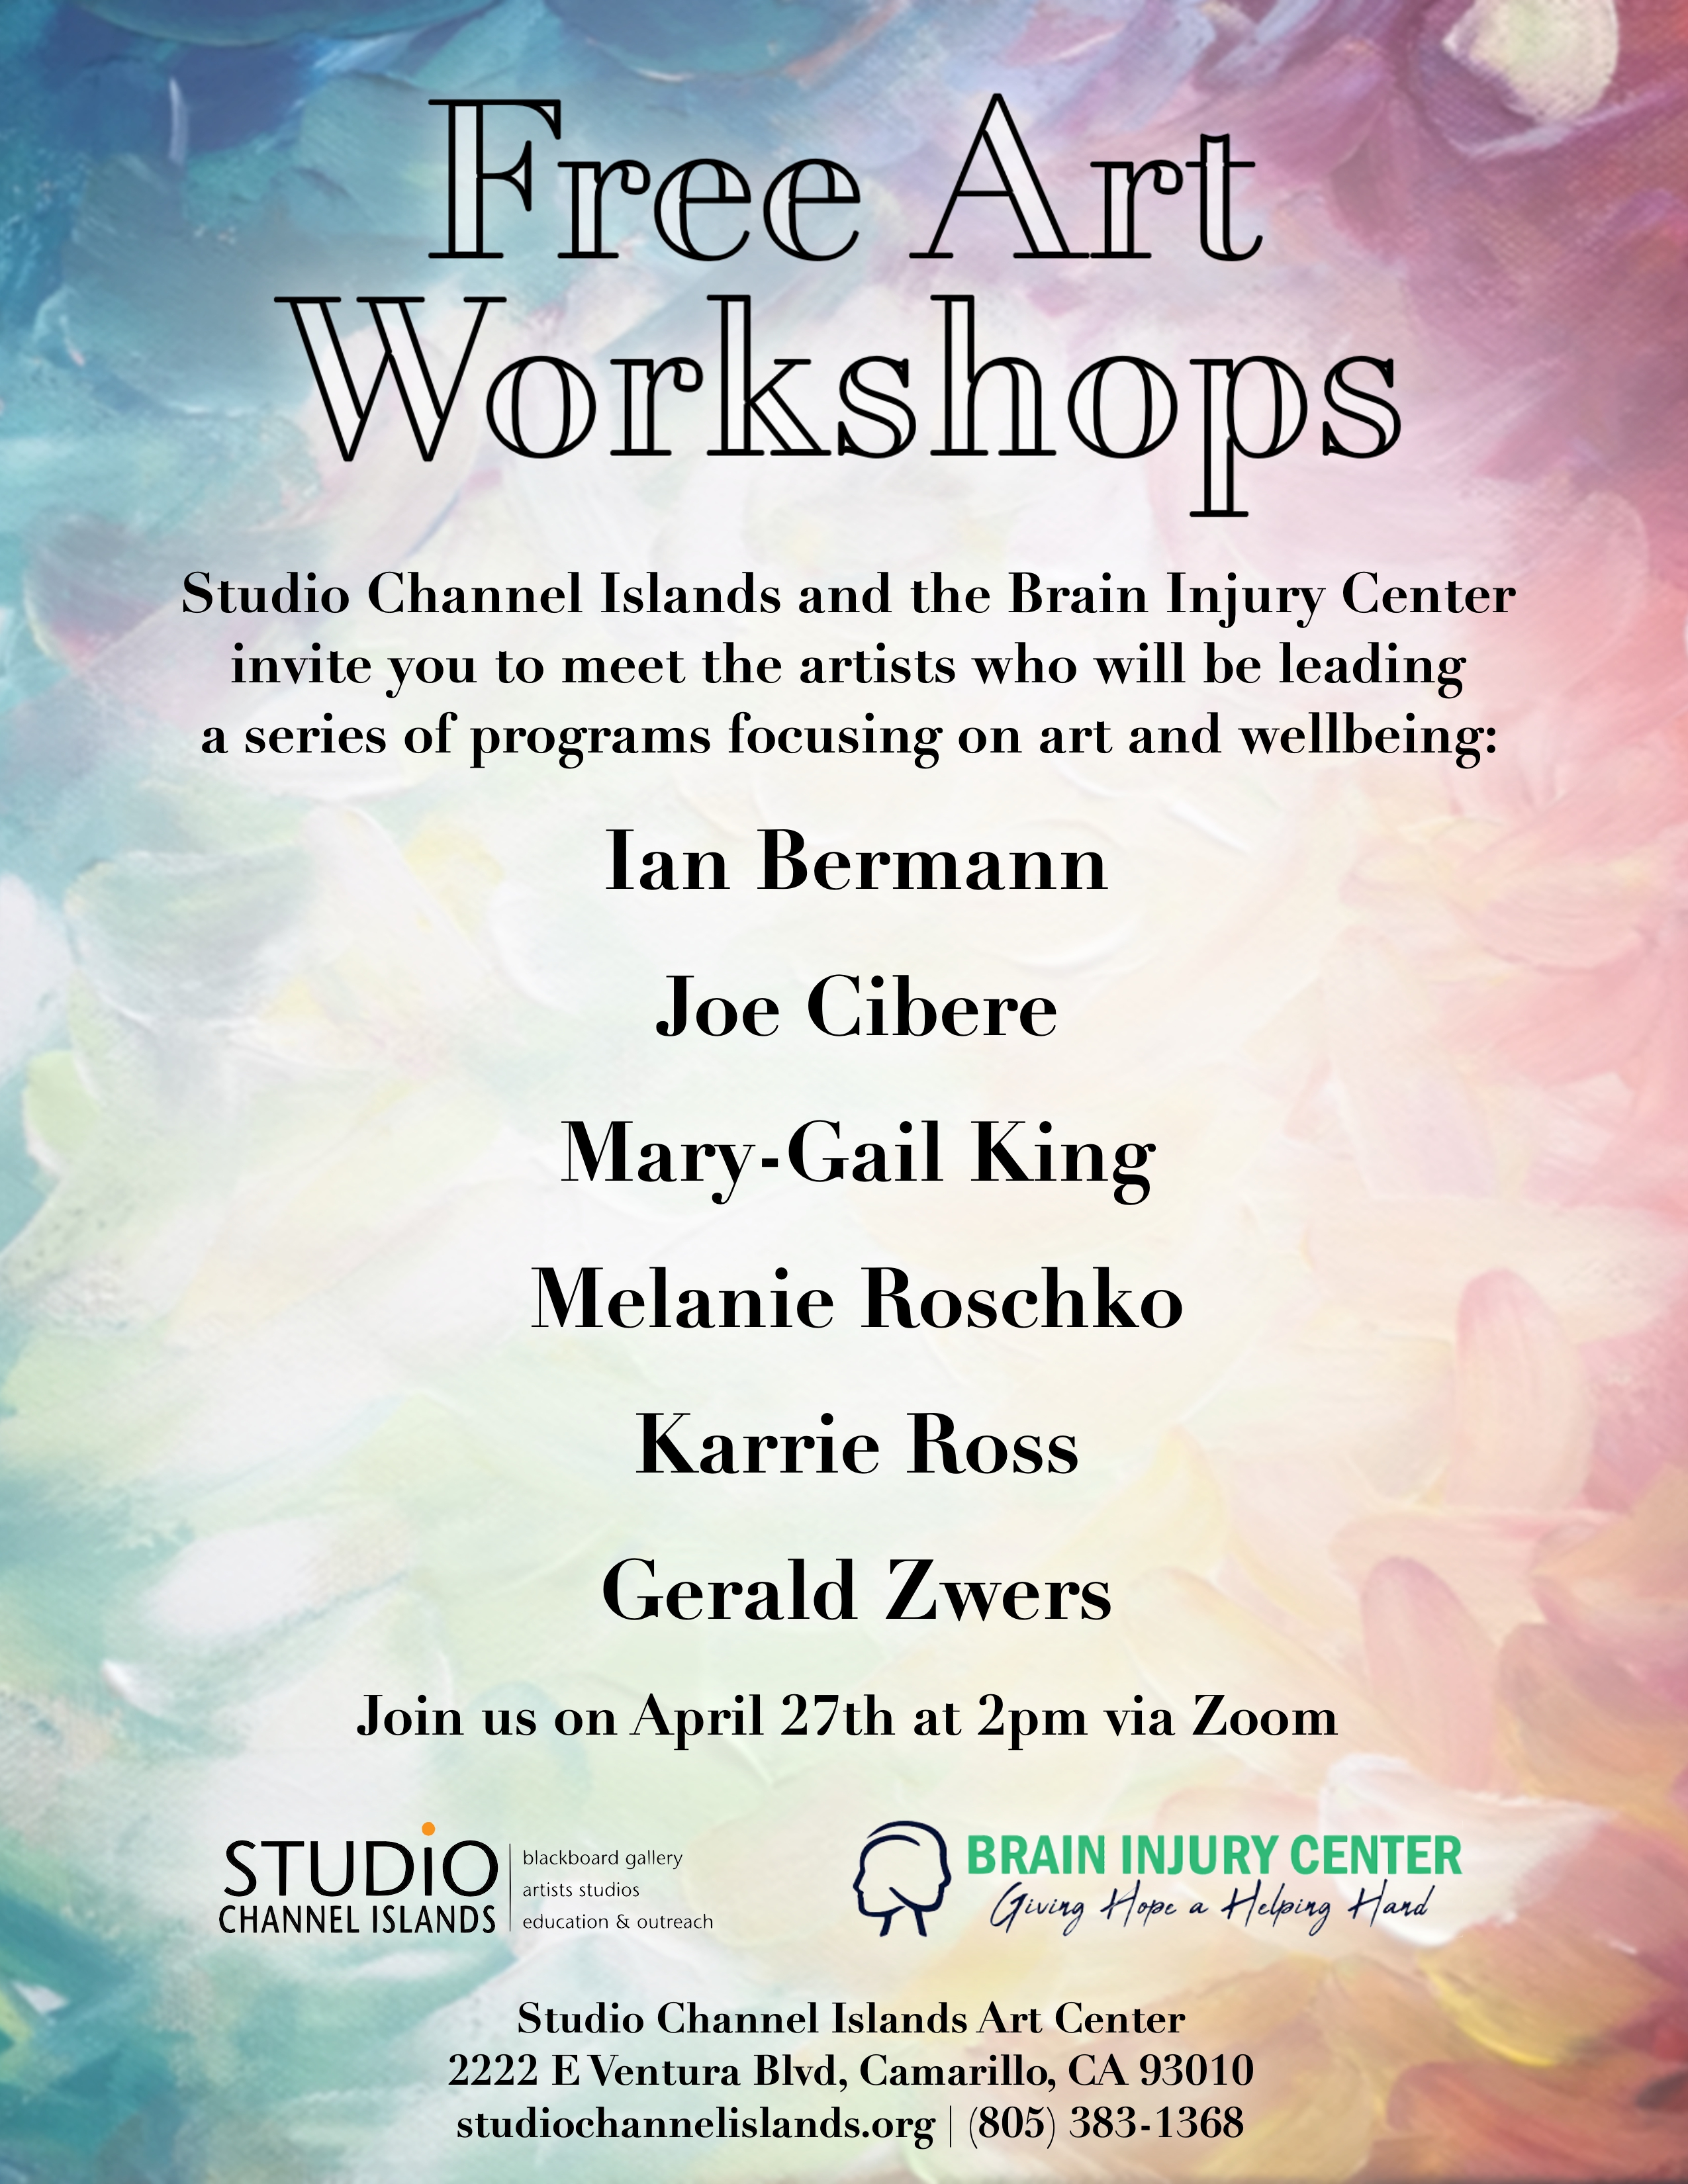 Flyer with same information as the event description; plus featured artists  Ian Bermann, Joe Cibere, Mary-Gail King, Melanie Roschko, Karrie Ross, and Gerald Zwers; and contact information to the Studio Channel Islands Art Center, 2222 E Ventura Blvd, Camarillo, CA 93010. Website at studiochannelislands.org and phone 805-383-1368.